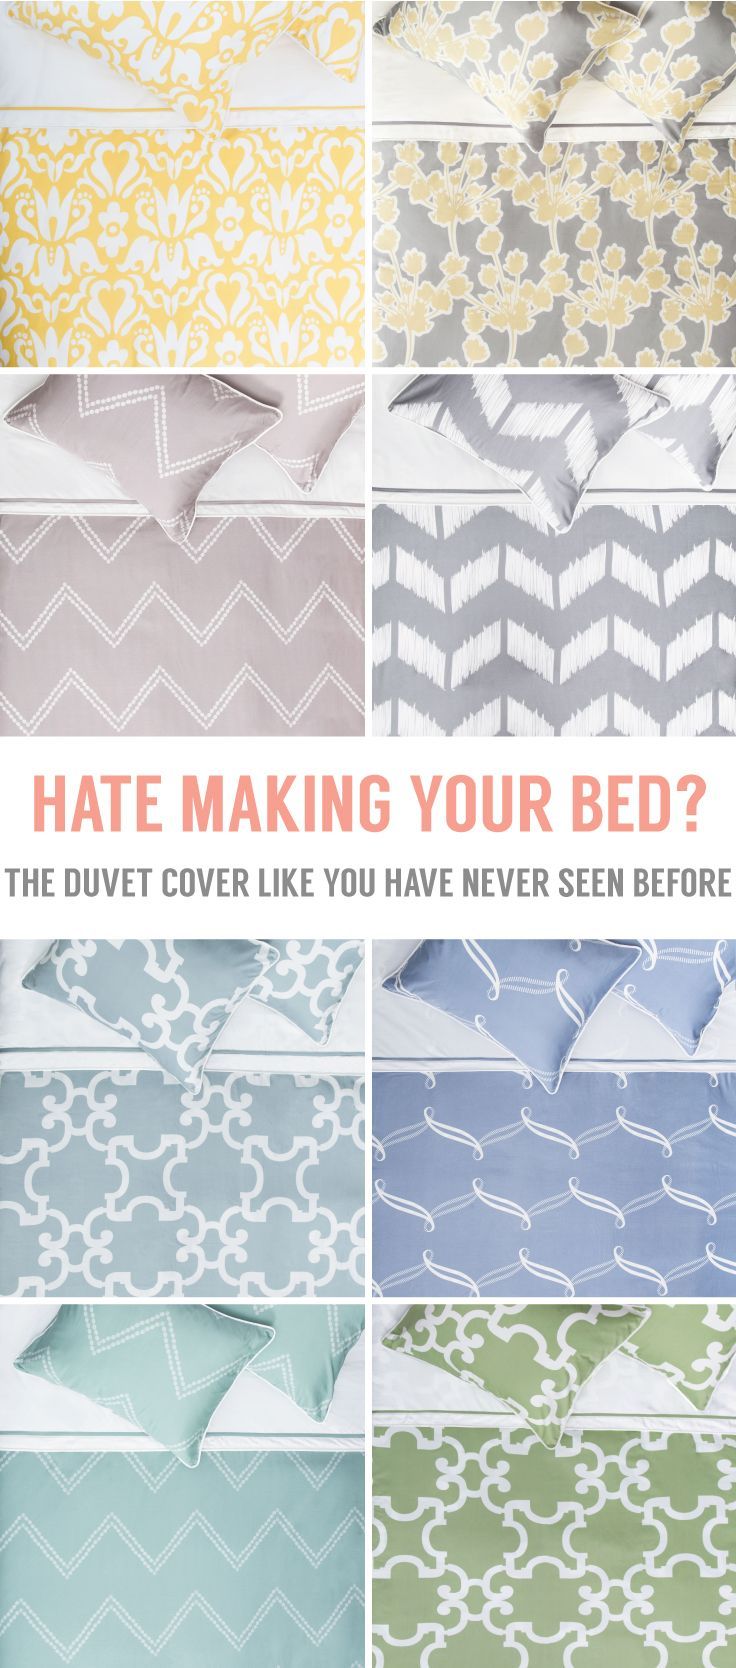 The easiest and fastest way to make your bed. As seen on the New York Times.